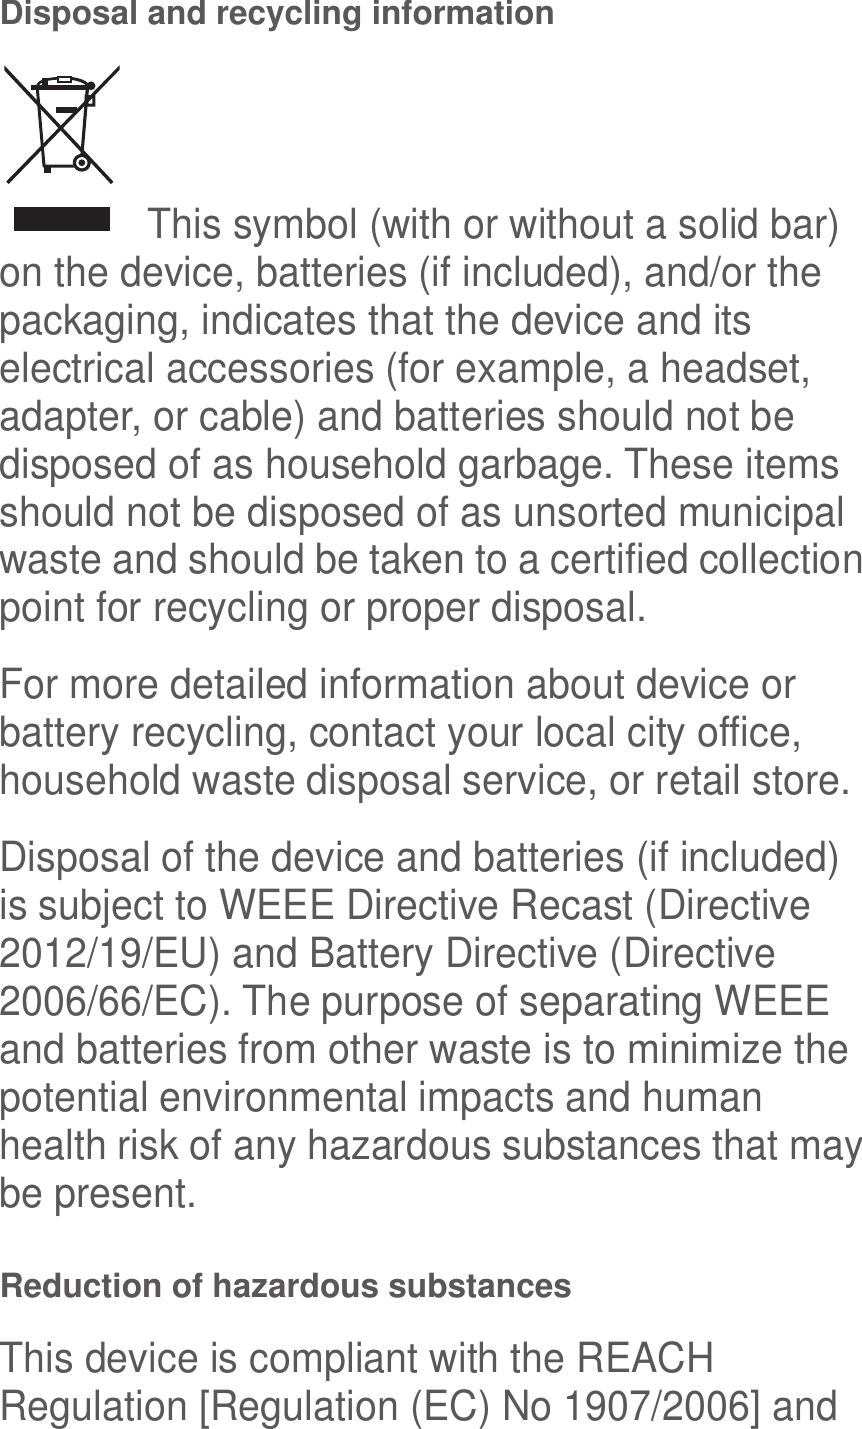  Disposal and recycling information   This symbol (with or without a solid bar) on the device, batteries (if included), and/or the packaging, indicates that the device and its electrical accessories (for example, a headset, adapter, or cable) and batteries should not be disposed of as household garbage. These items should not be disposed of as unsorted municipal waste and should be taken to a certified collection point for recycling or proper disposal. For more detailed information about device or battery recycling, contact your local city office, household waste disposal service, or retail store. Disposal of the device and batteries (if included) is subject to WEEE Directive Recast (Directive 2012/19/EU) and Battery Directive (Directive 2006/66/EC). The purpose of separating WEEE and batteries from other waste is to minimize the potential environmental impacts and human health risk of any hazardous substances that may be present. Reduction of hazardous substances This device is compliant with the REACH Regulation [Regulation (EC) No 1907/2006] and 